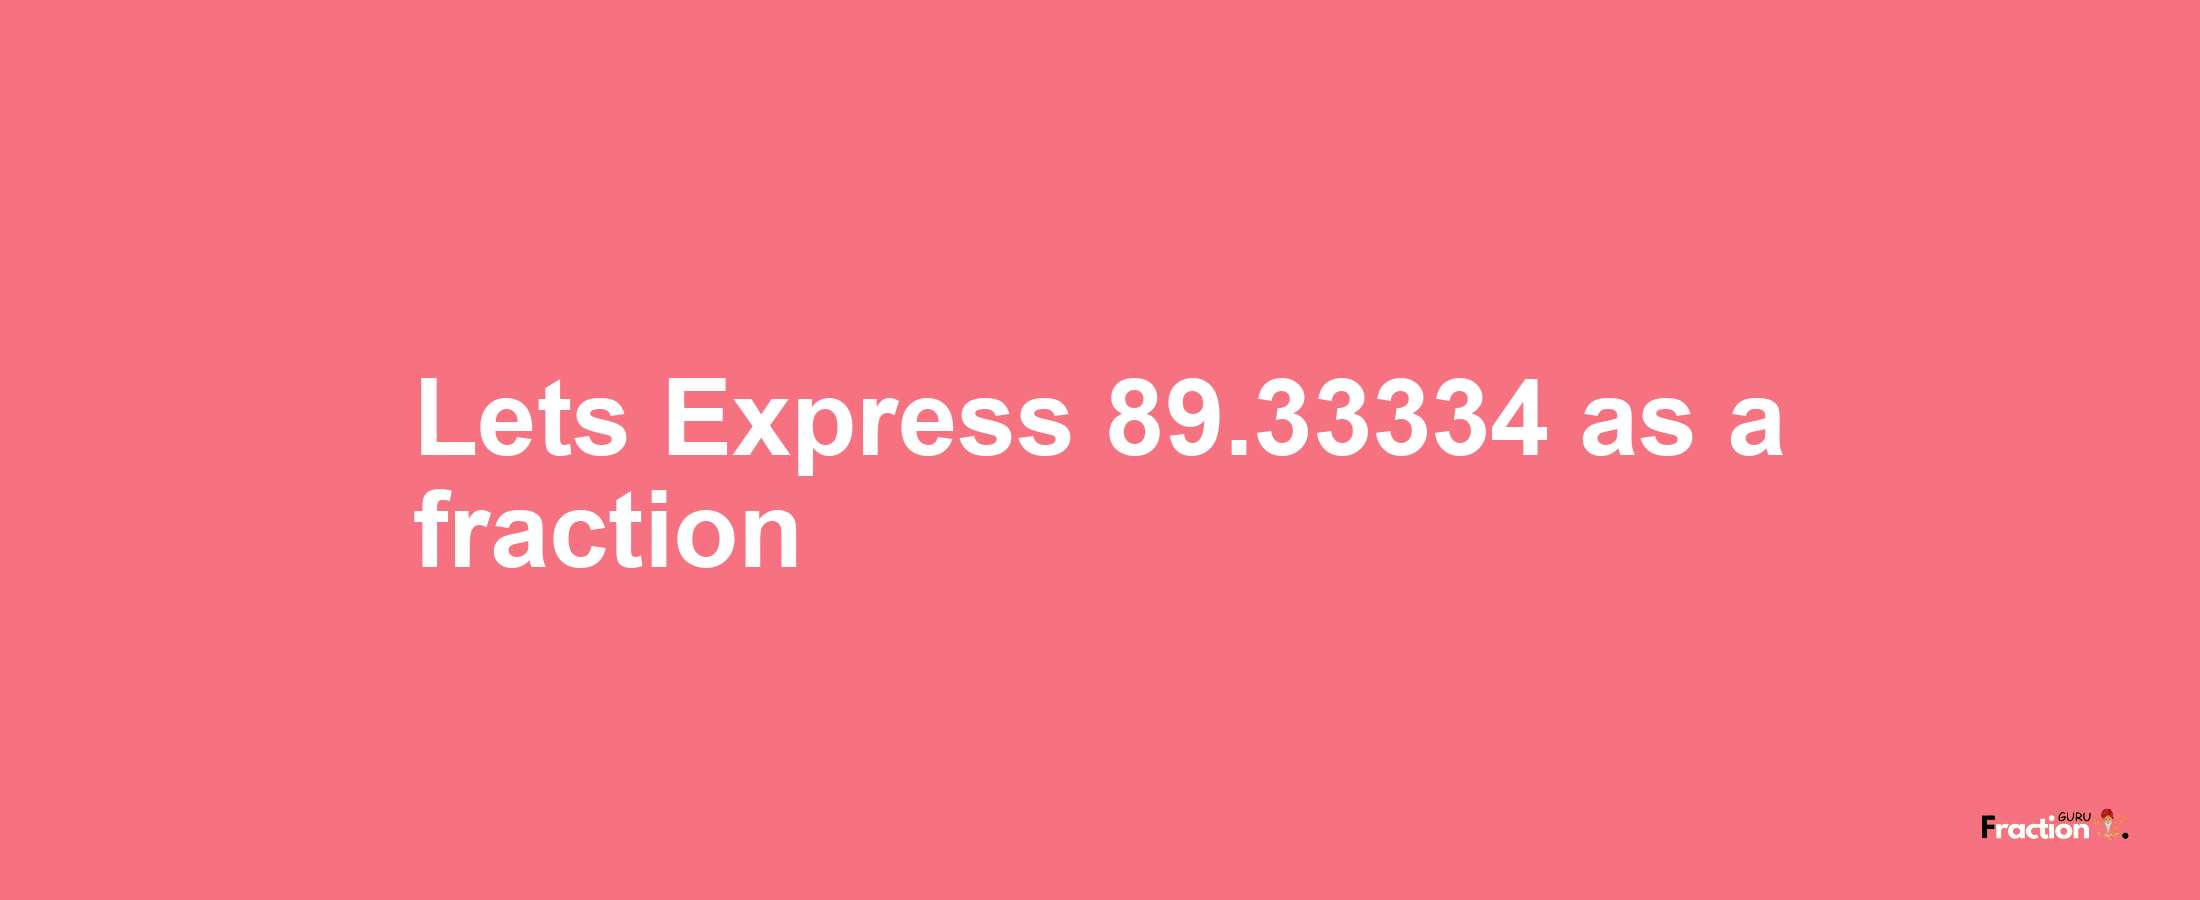 Lets Express 89.33334 as afraction